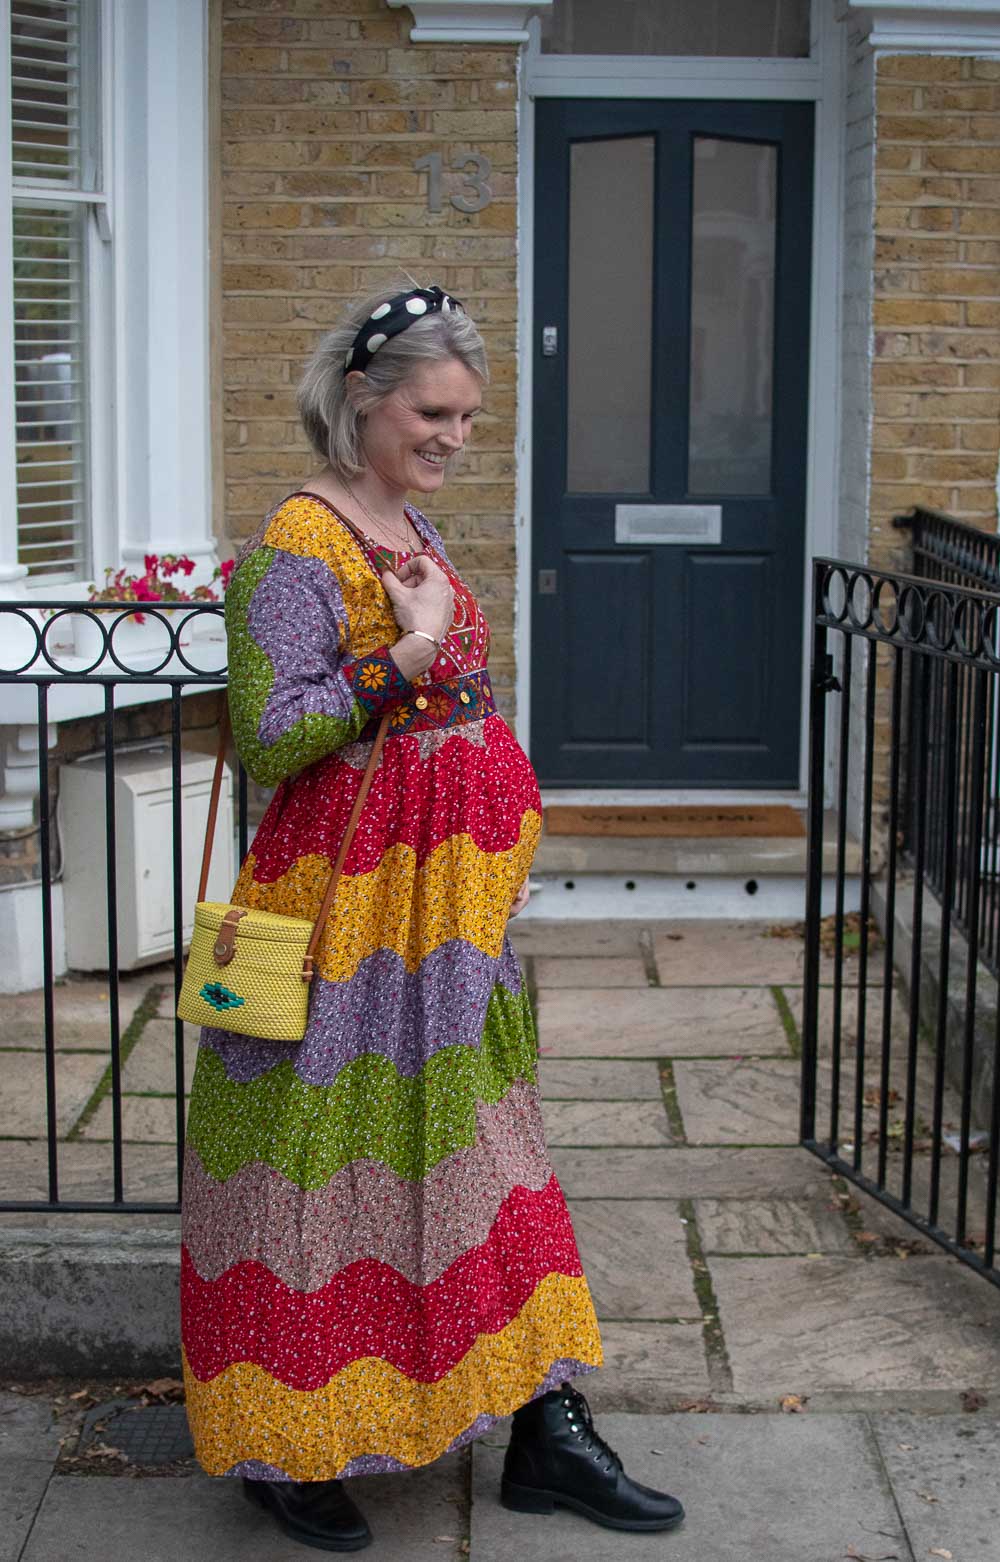 Karen Maurice of n4mummy wearing a colourful rainbow dress, spotty hairband and yellow bag